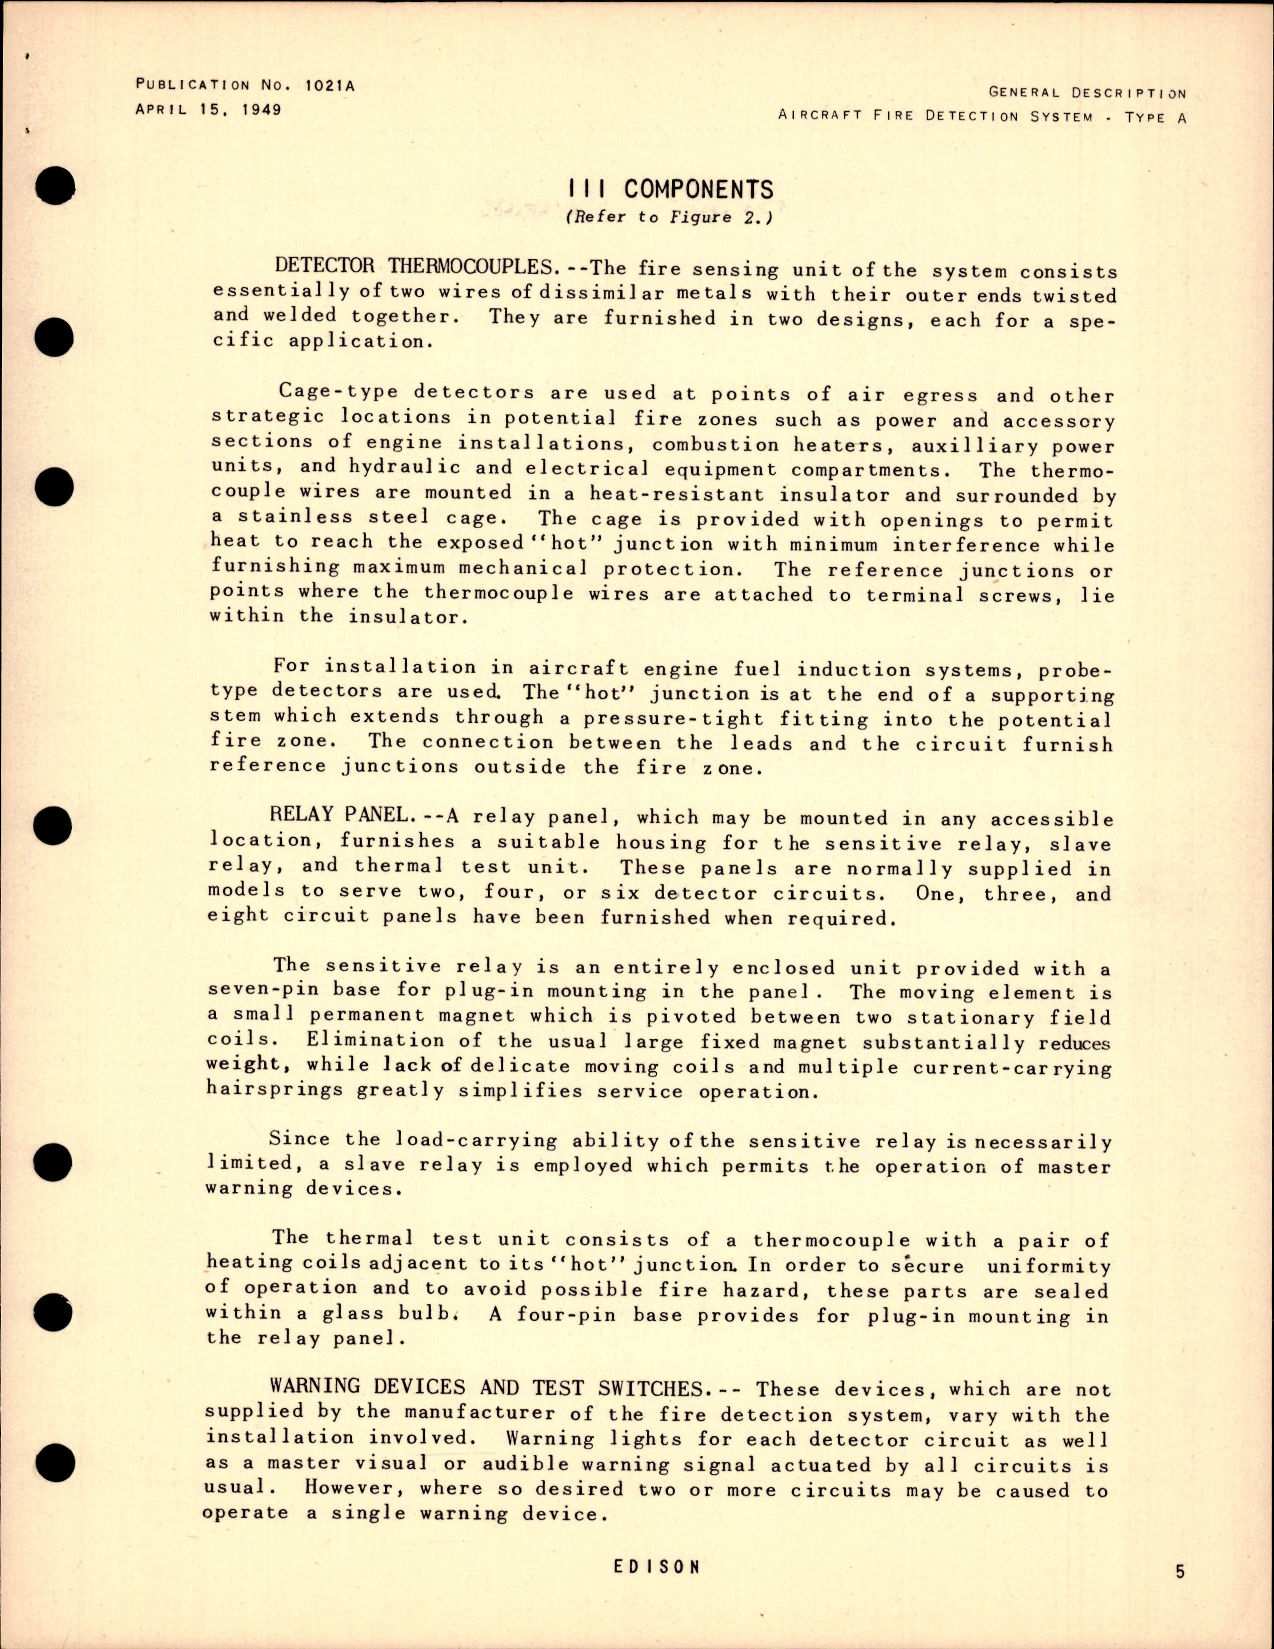 Sample page 7 from AirCorps Library document: Service Manual No. 502 for Aircraft Fire Detection System Type A